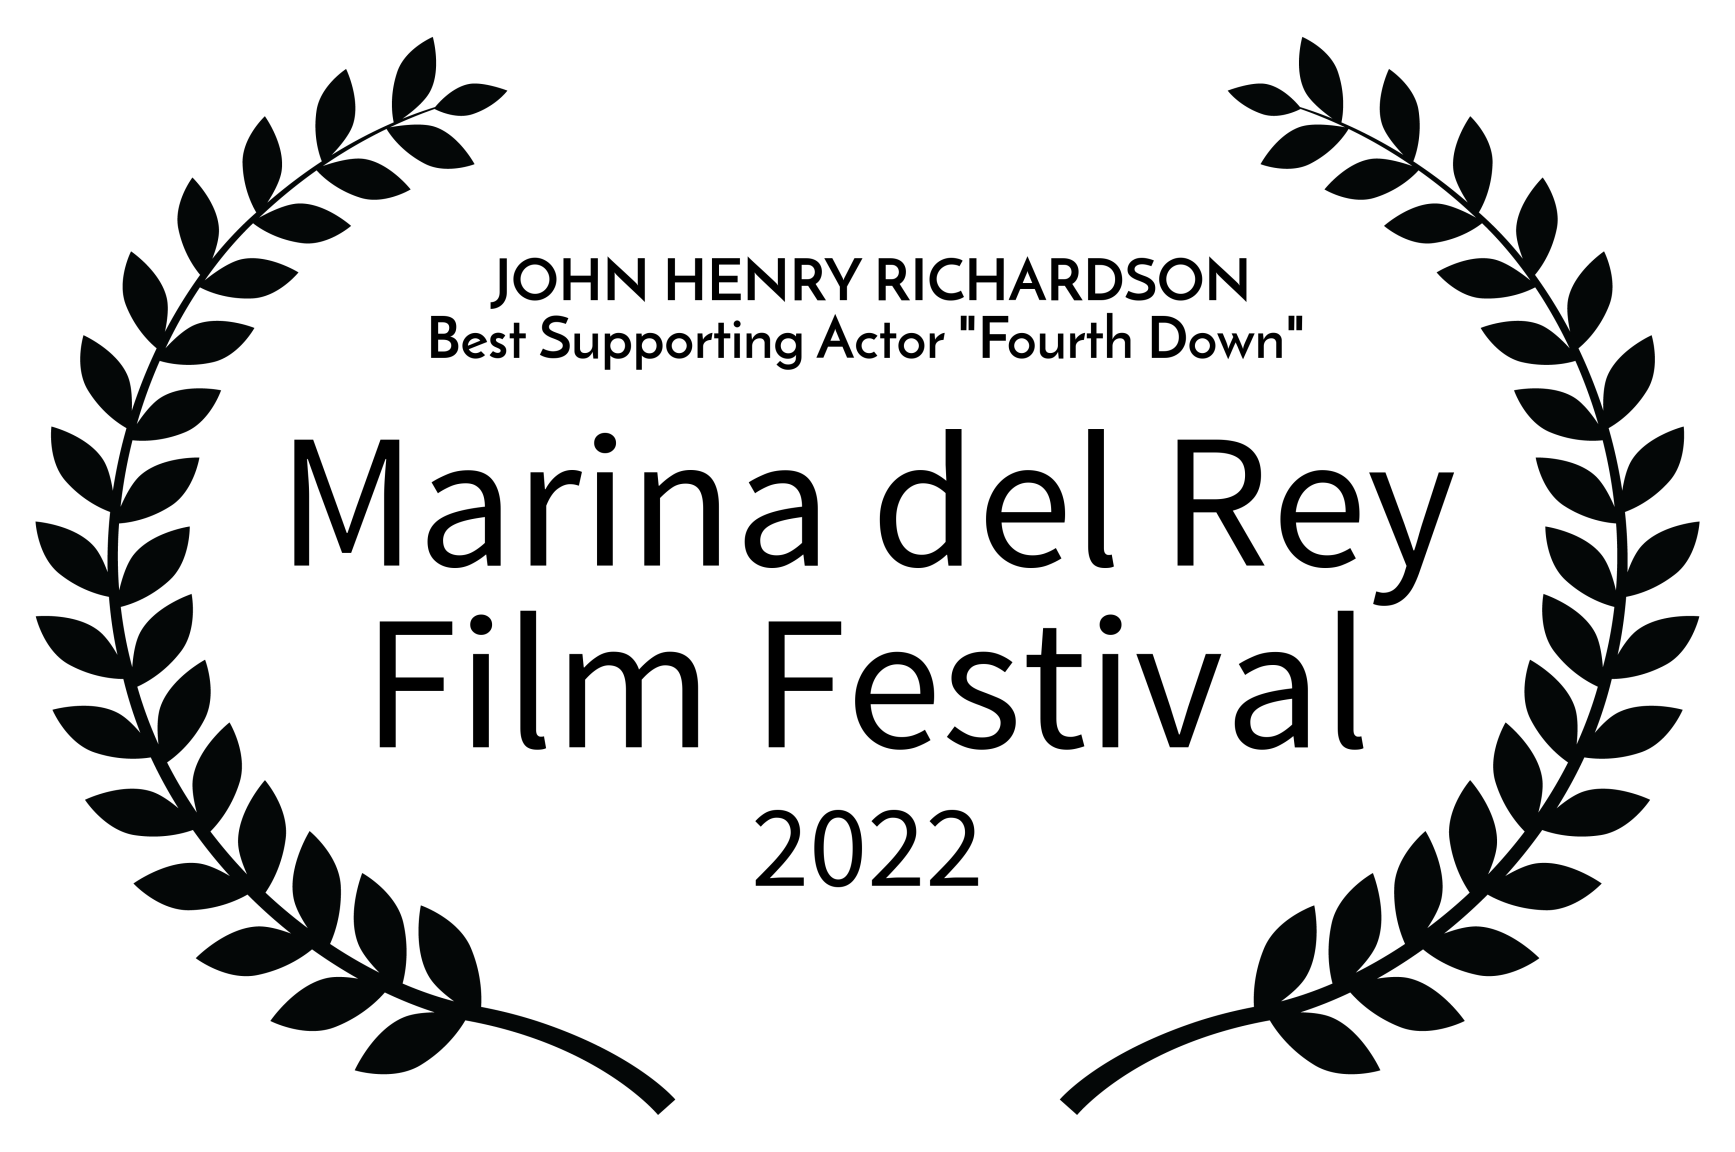 Fourth Down Award Best Supporting Actor Marina Del Rey Film Festival